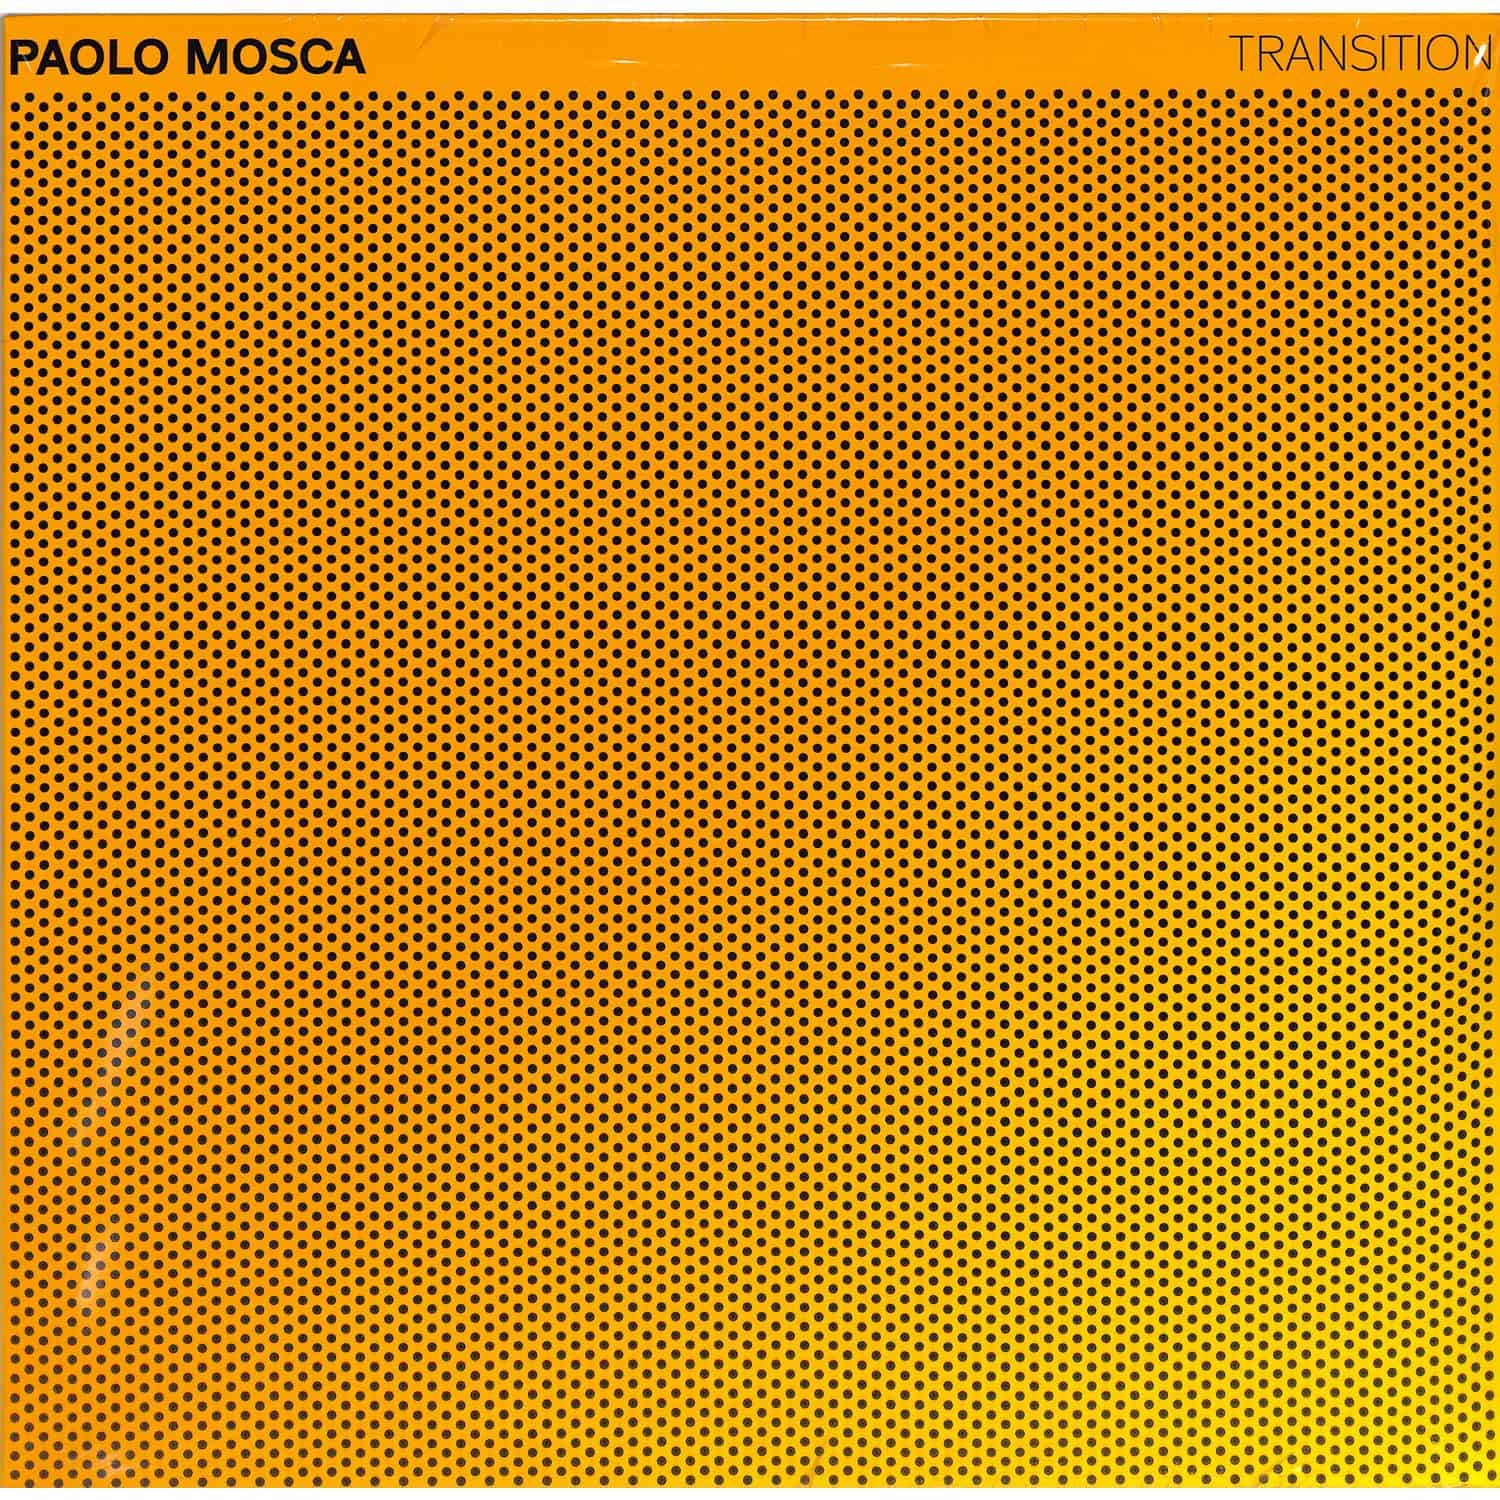 Paolo Mosca - TRANSITION 